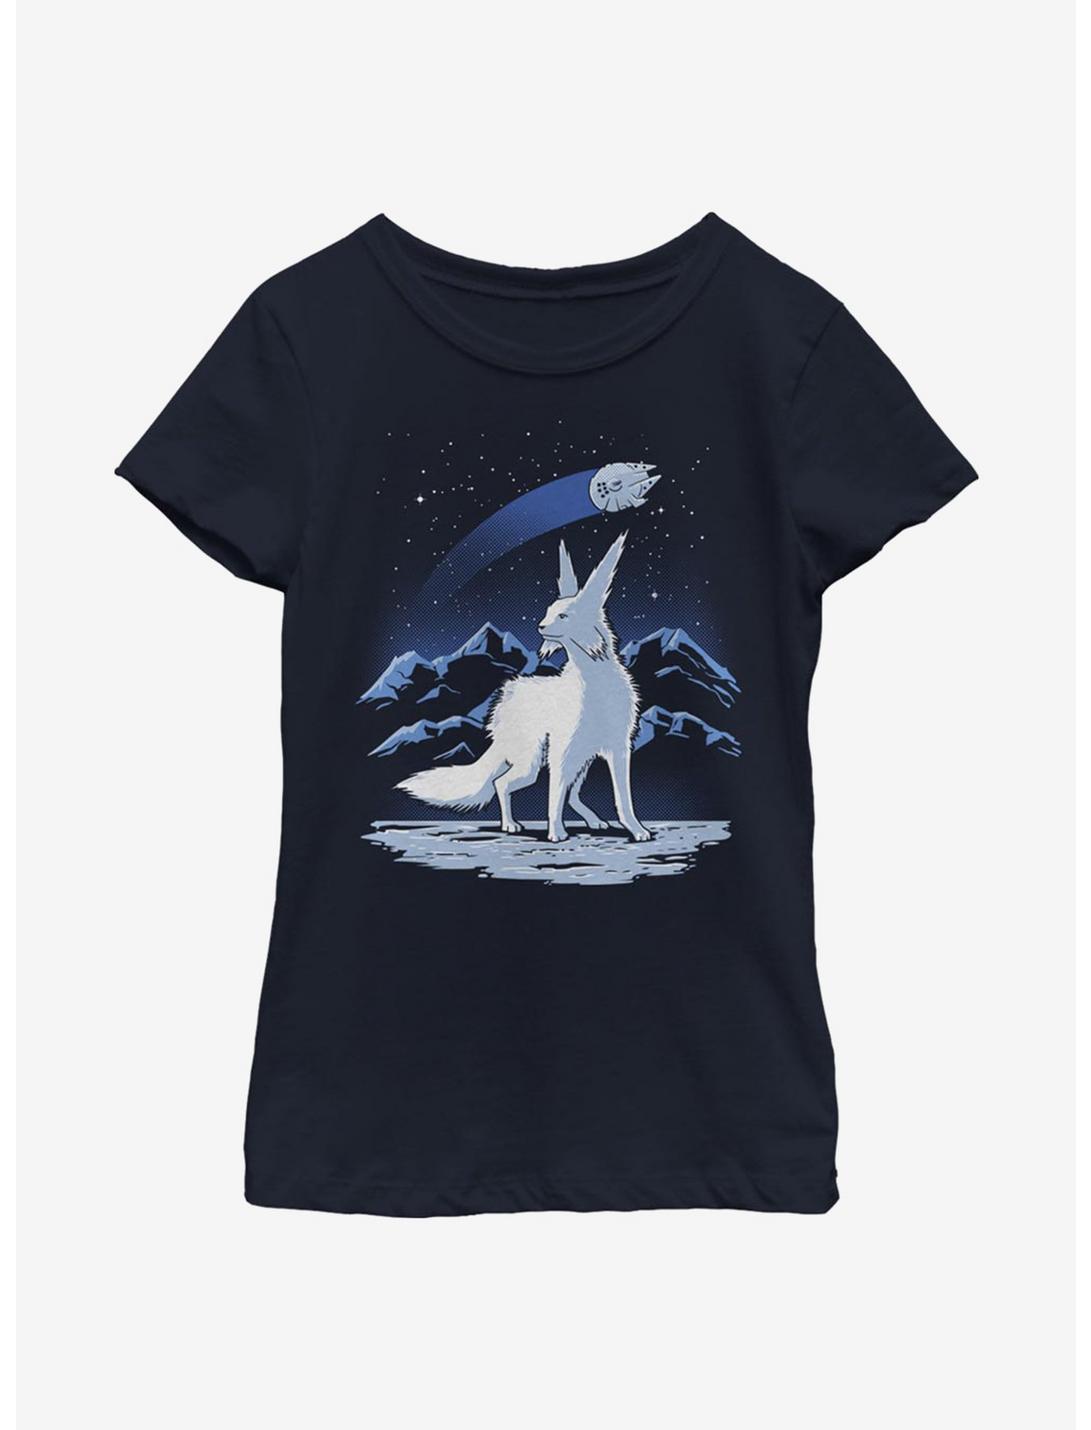 Star Wars Episode VIII: The Last Jedi Vulptex And Falcon Youth Girls T-Shirt, NAVY, hi-res